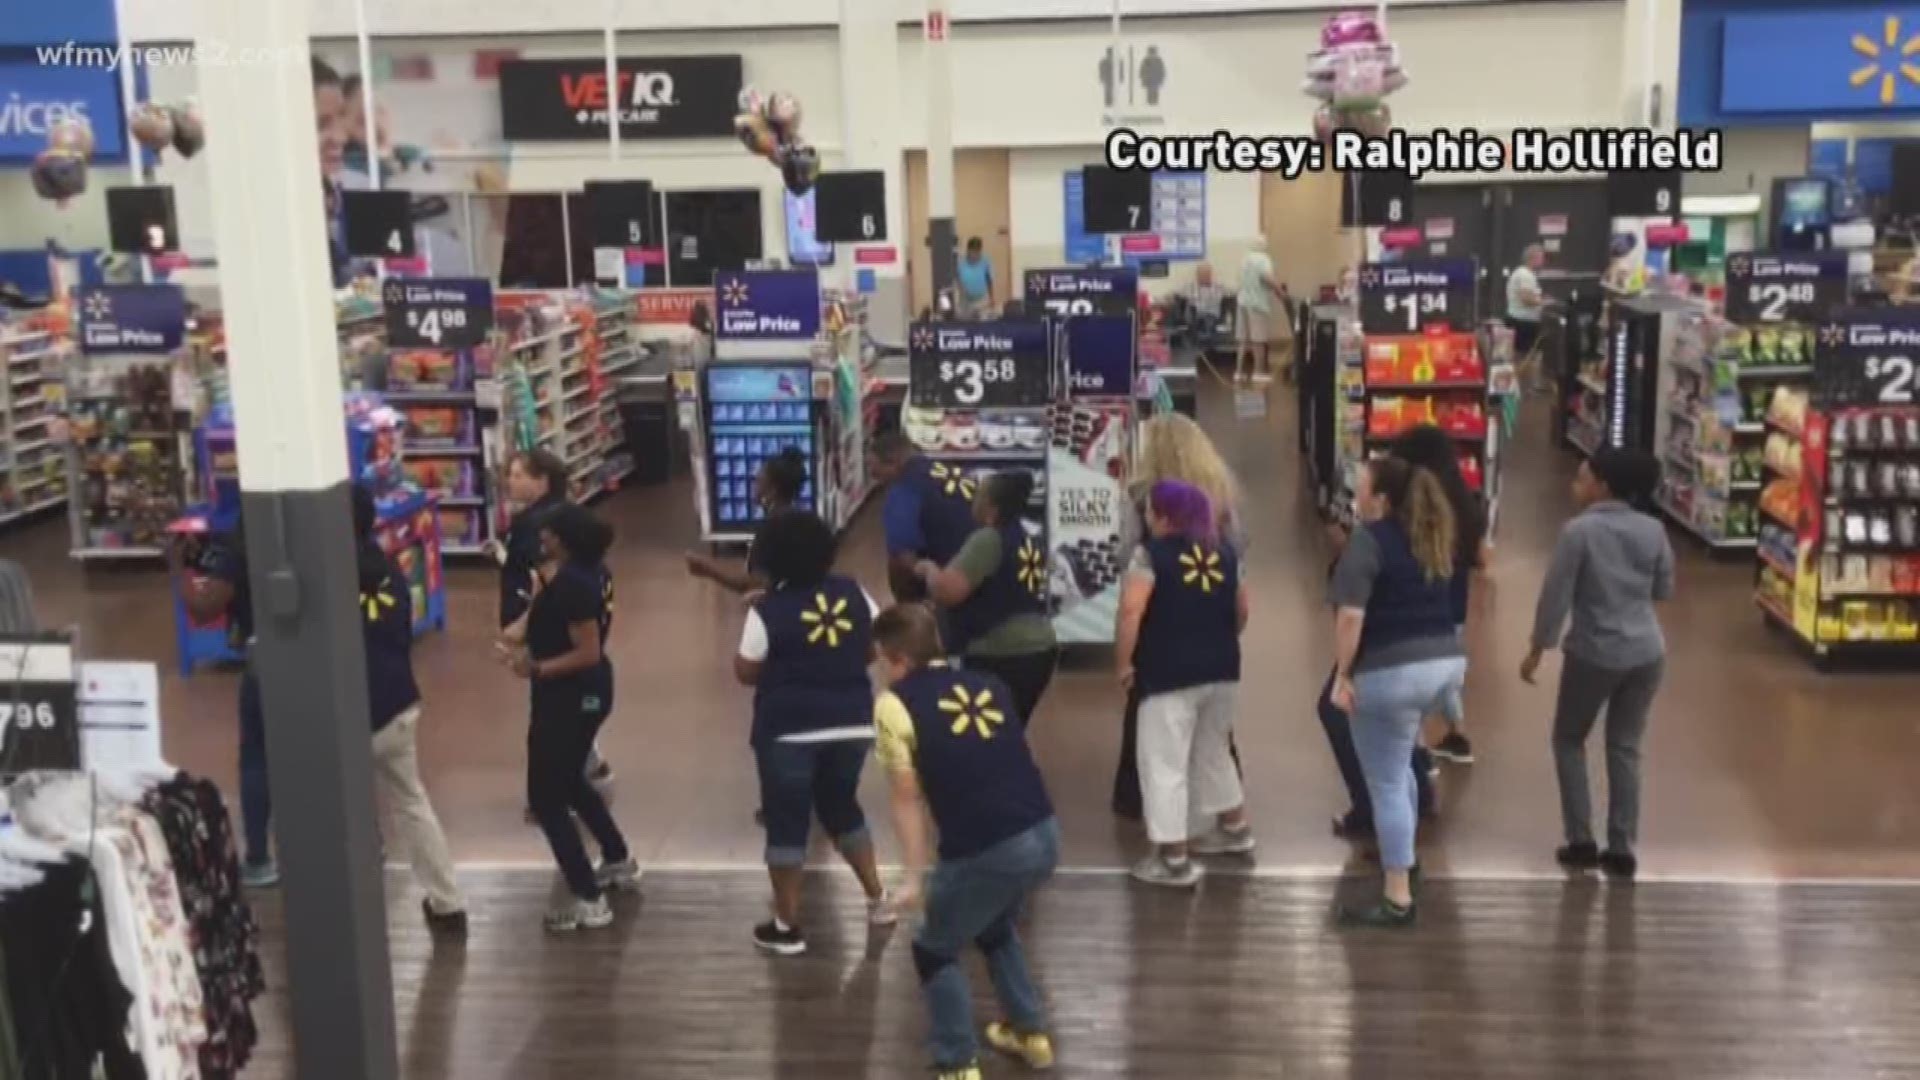 Some triad Walmart workers have dancing skills. They busted a move for the Walmart Shuffle Challenge, and the video went viral. One of the workers has some dance experience.